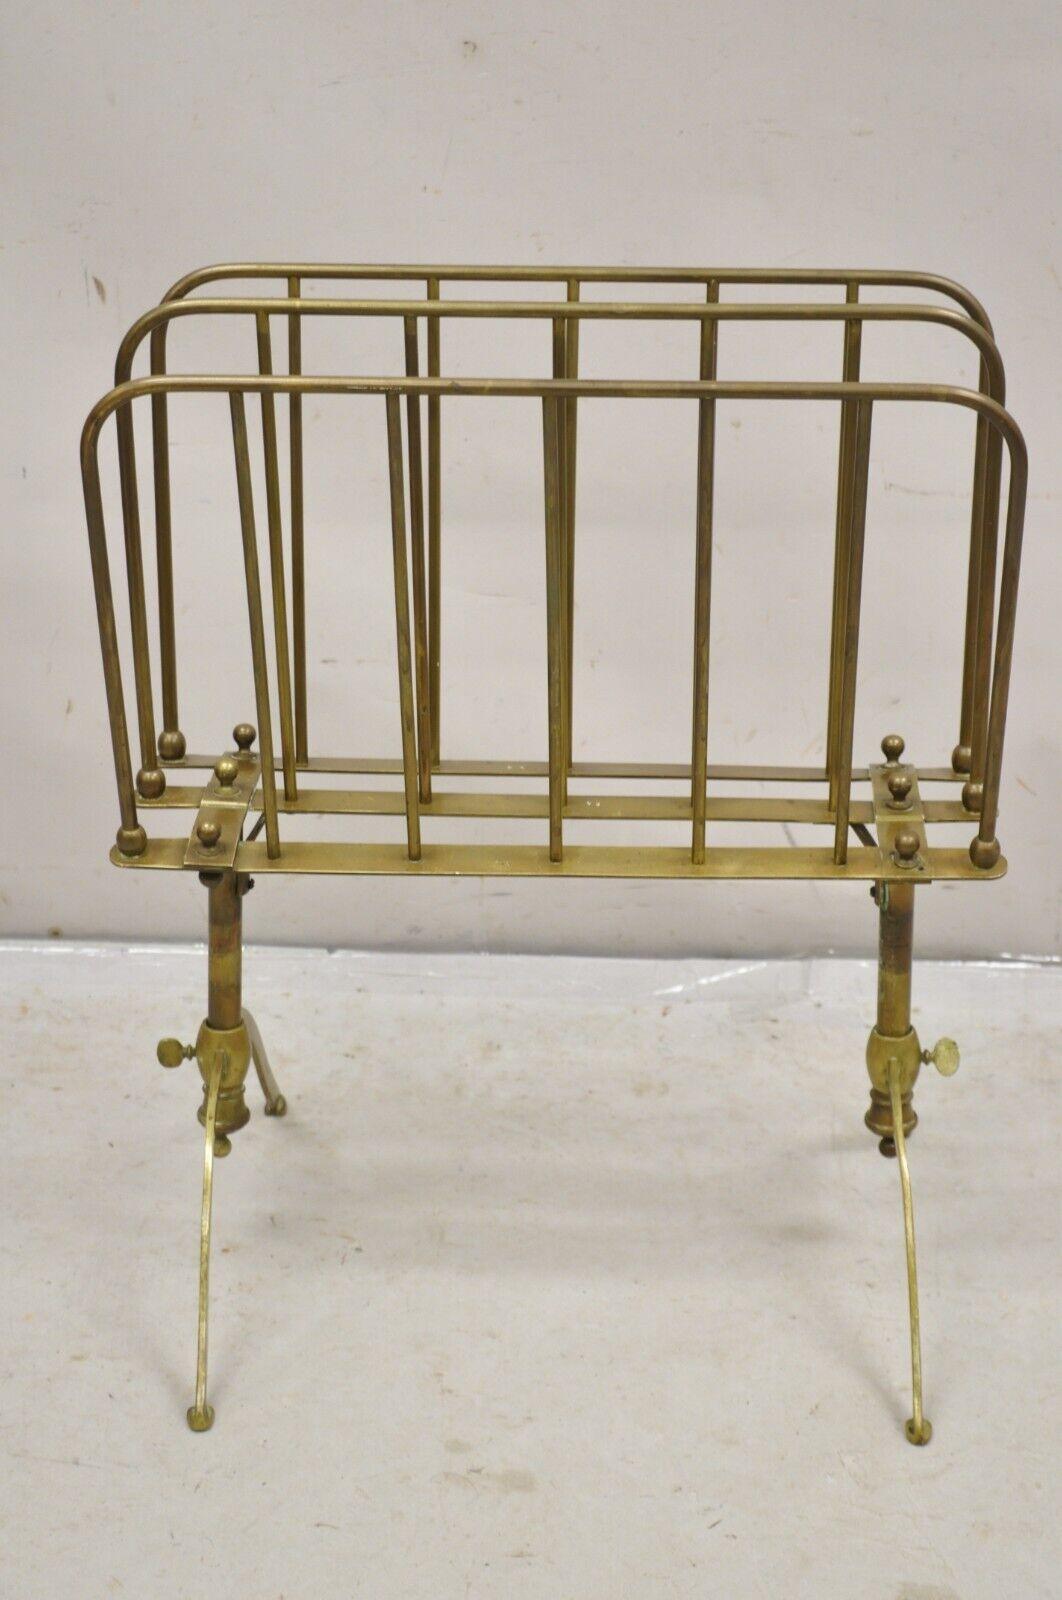 Vintage A. Ravenel Paris French Mid Century Modern Brass Magazine Holder Stand. Item features an adjustable height (23